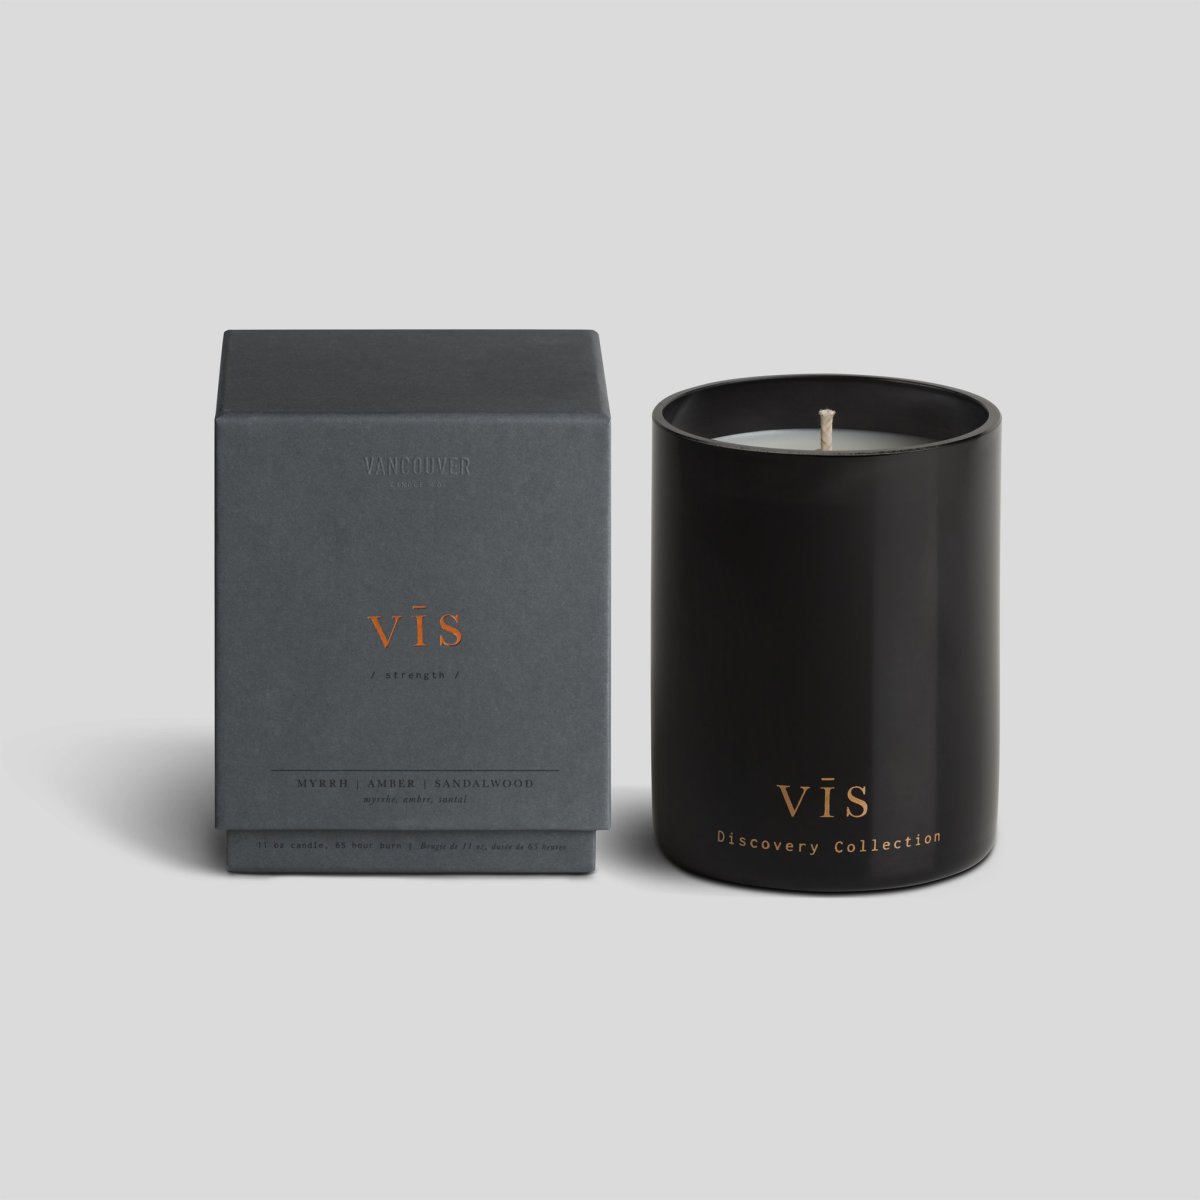 Vancouver Candle Co. Vis Candle, $45, available here. Photo: Courtesy of Vancouver Candle Co.